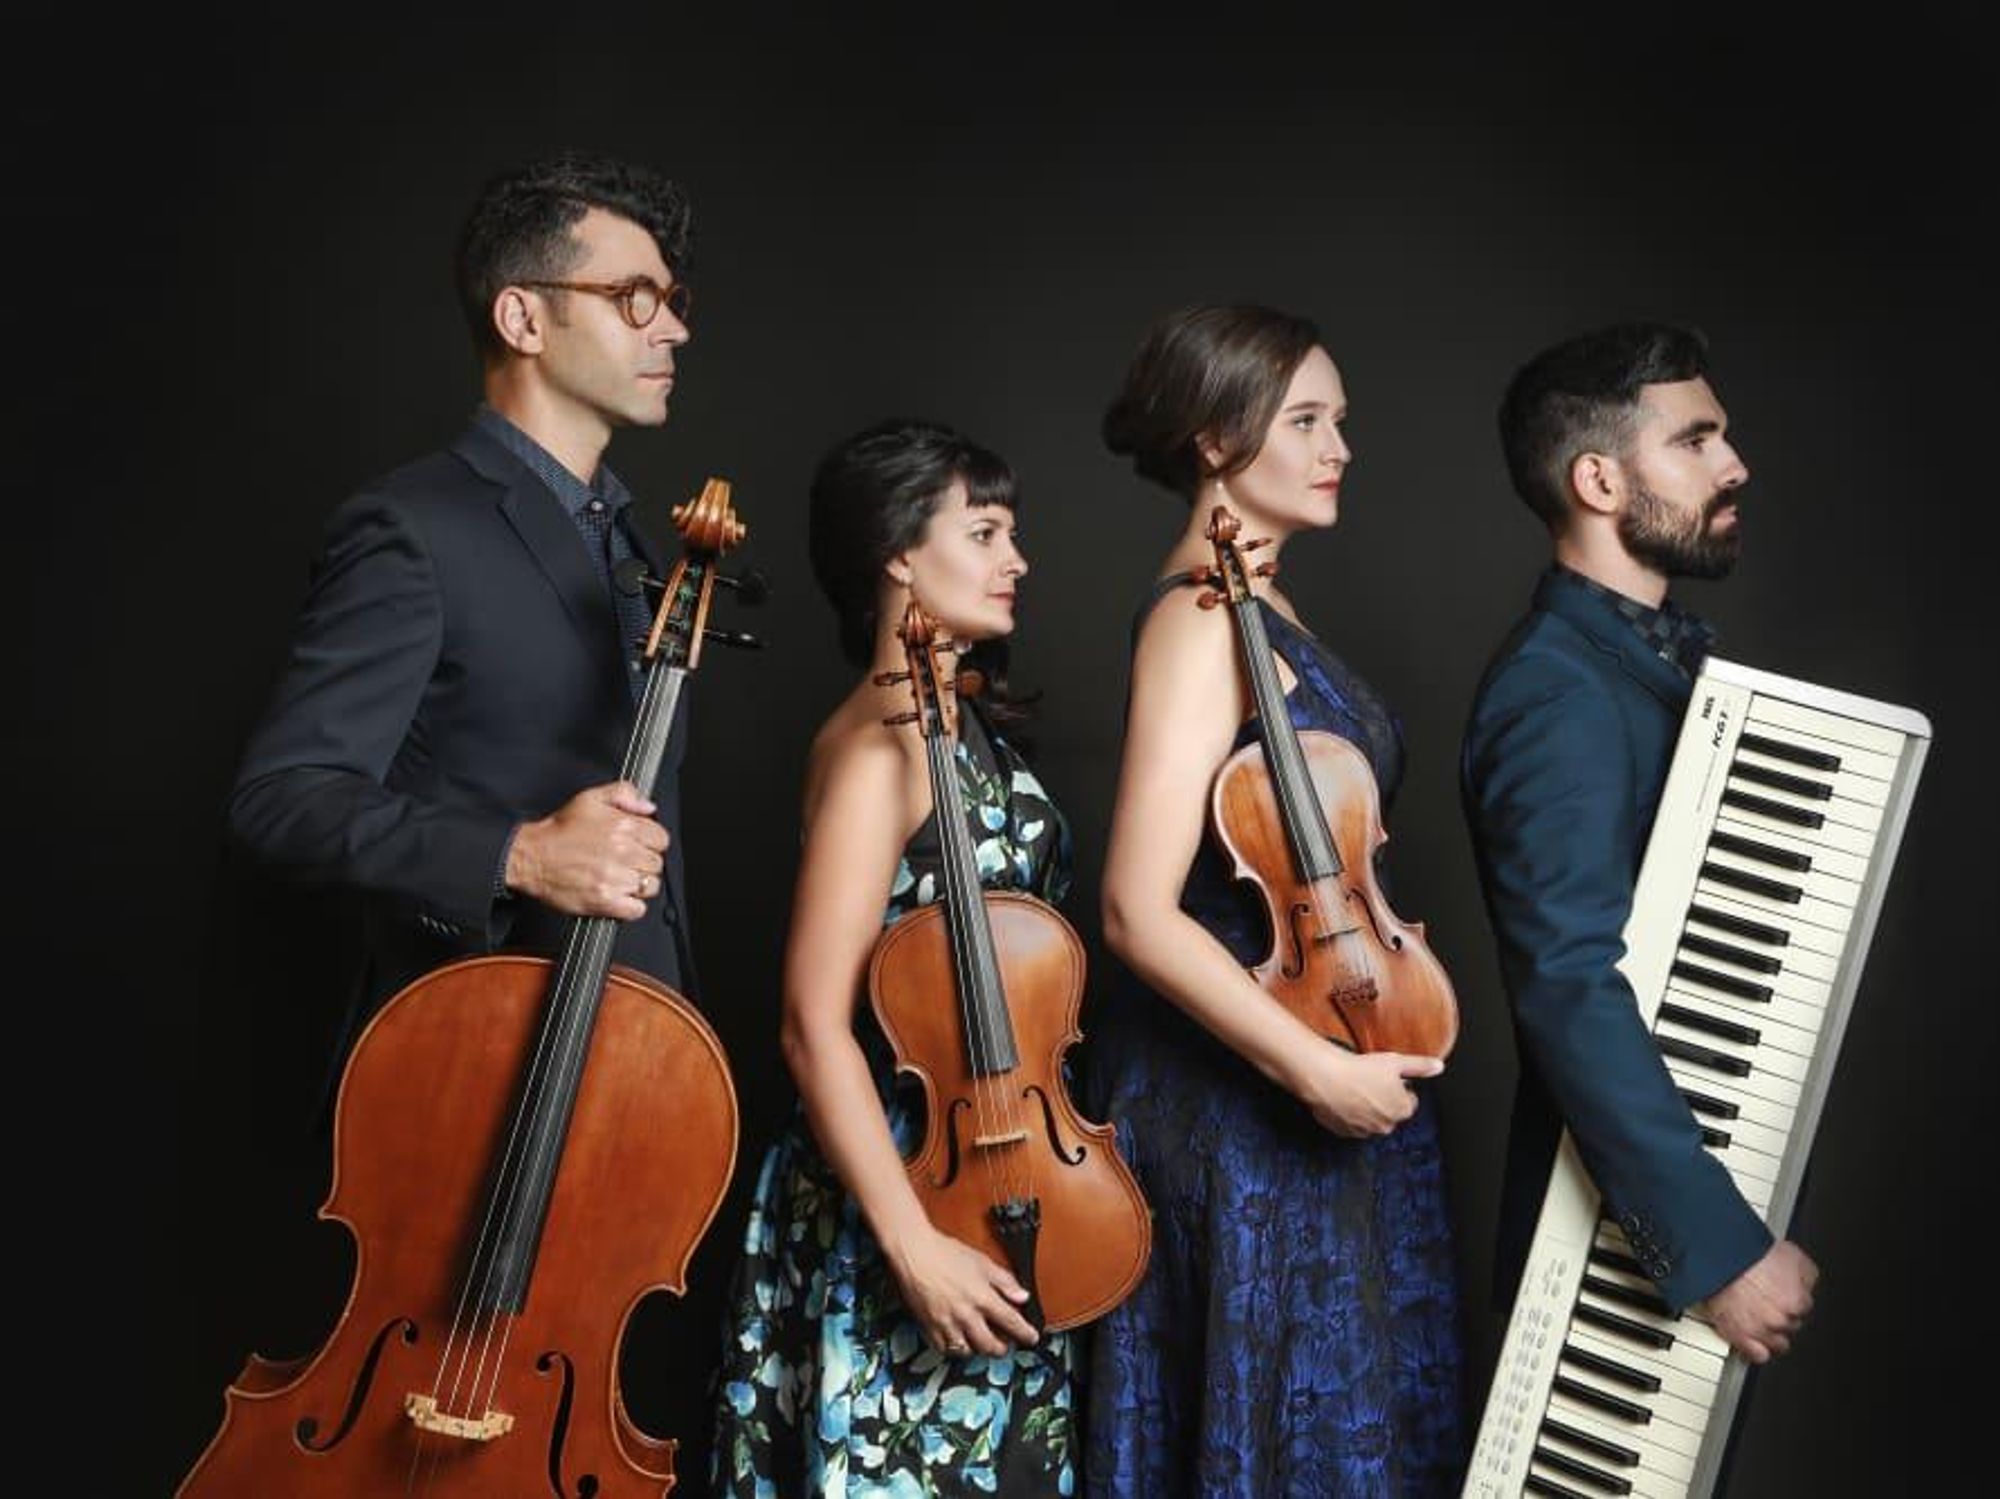 The four members of the Agarita chamber quartet line up with their instruments.